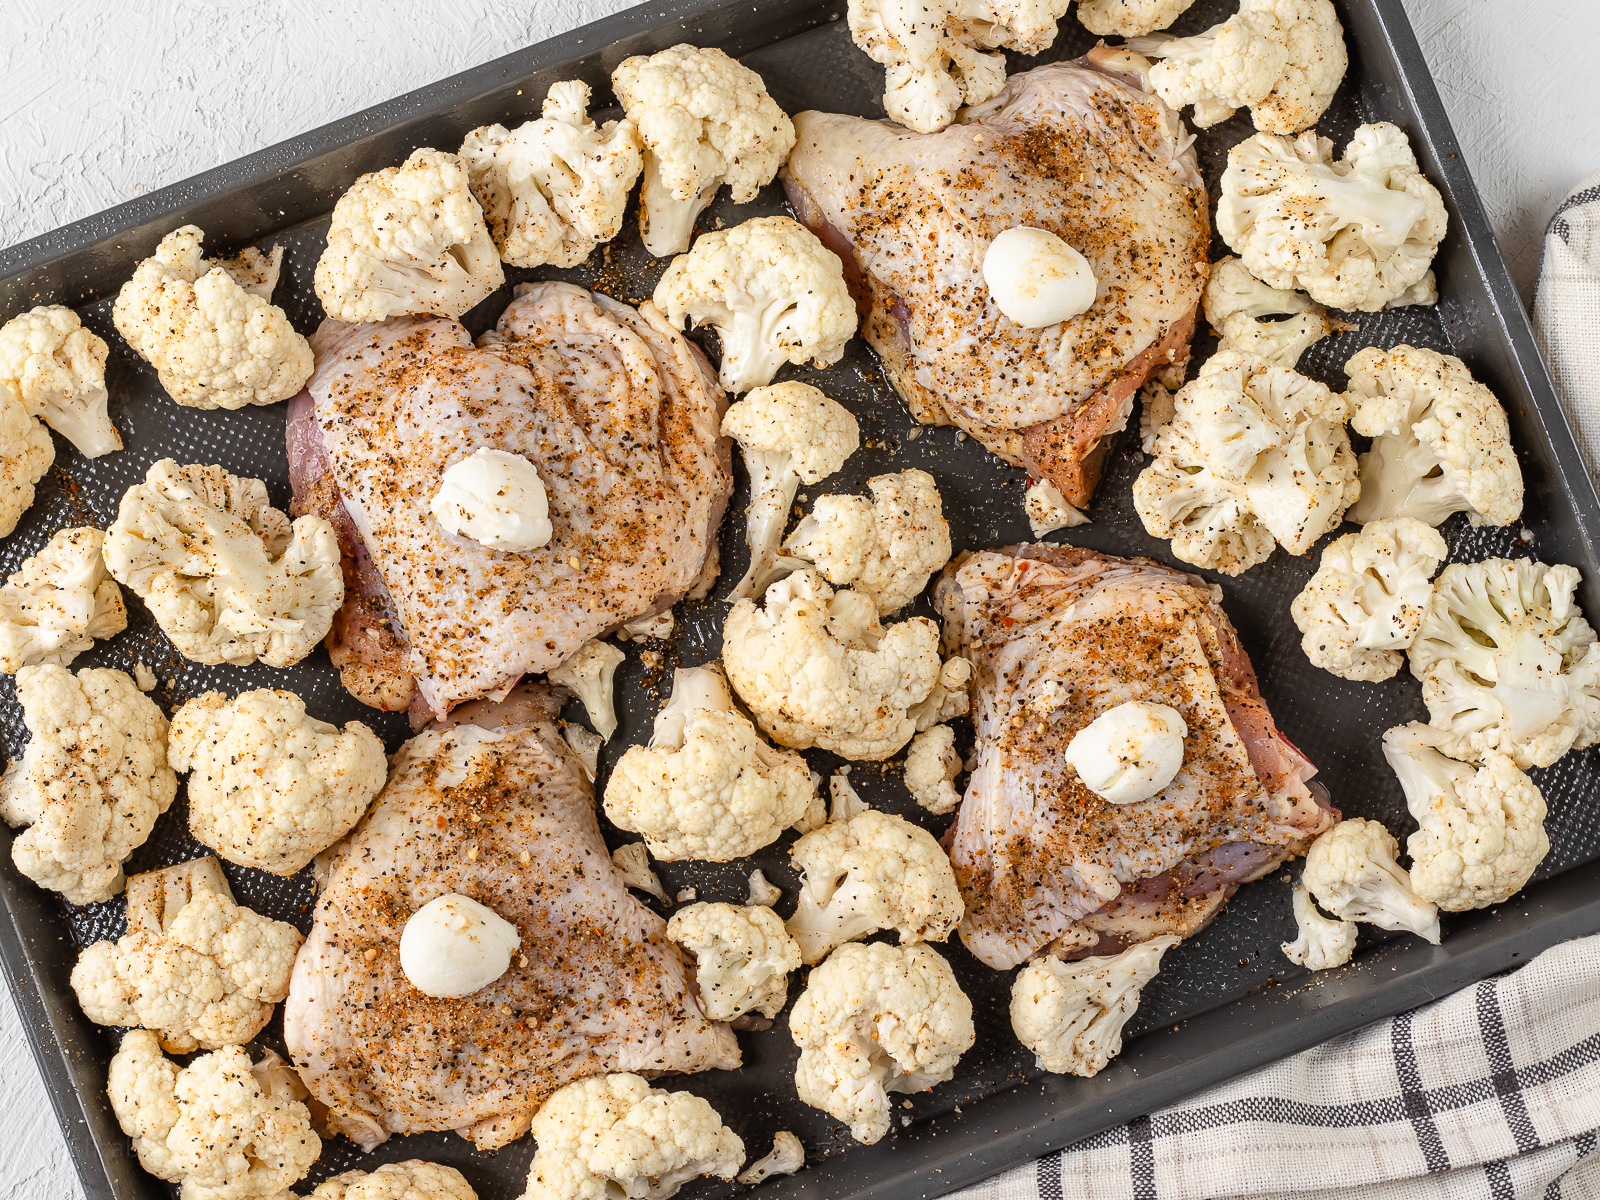 A baking sheet topped with a dollop of butter and cajun seasoned chicken thighs. Seasoned cauliflower surrounding the chicken and ready to go in the oven.